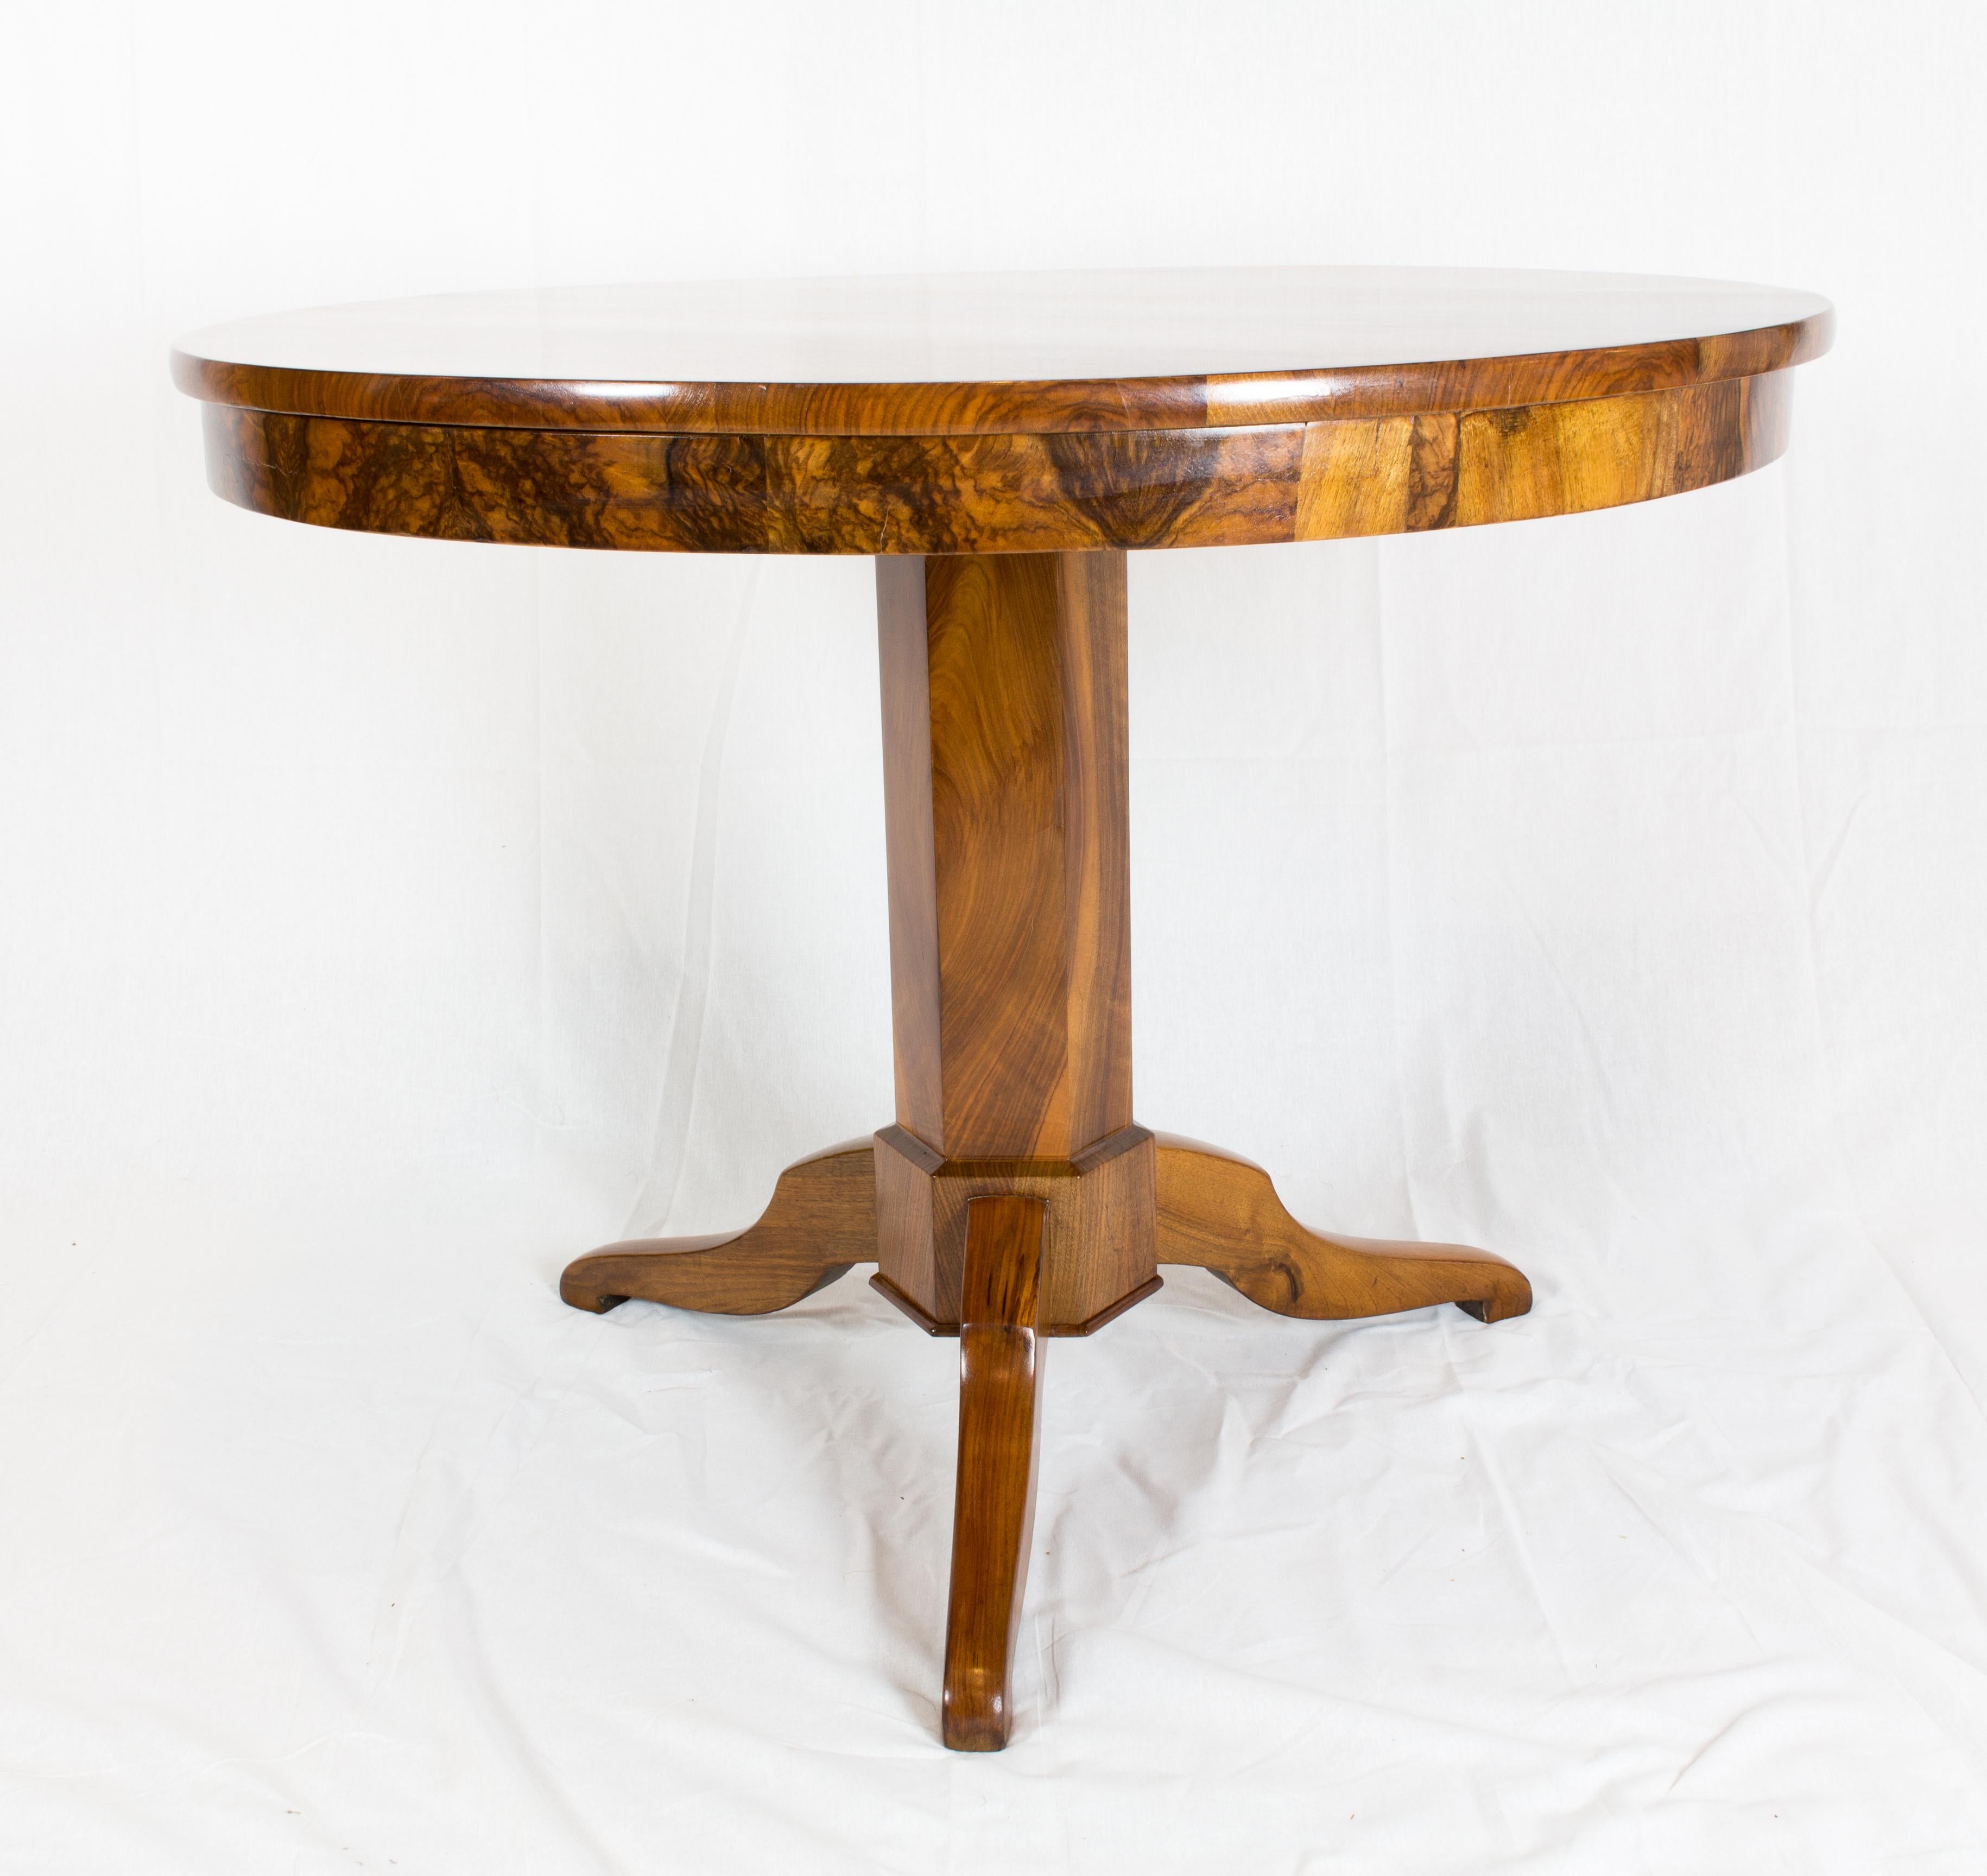 The round table is from the time of the Biedermeier and was made of veneered walnut on pine wood. The feet are made of solid walnut. In very good restored condition.